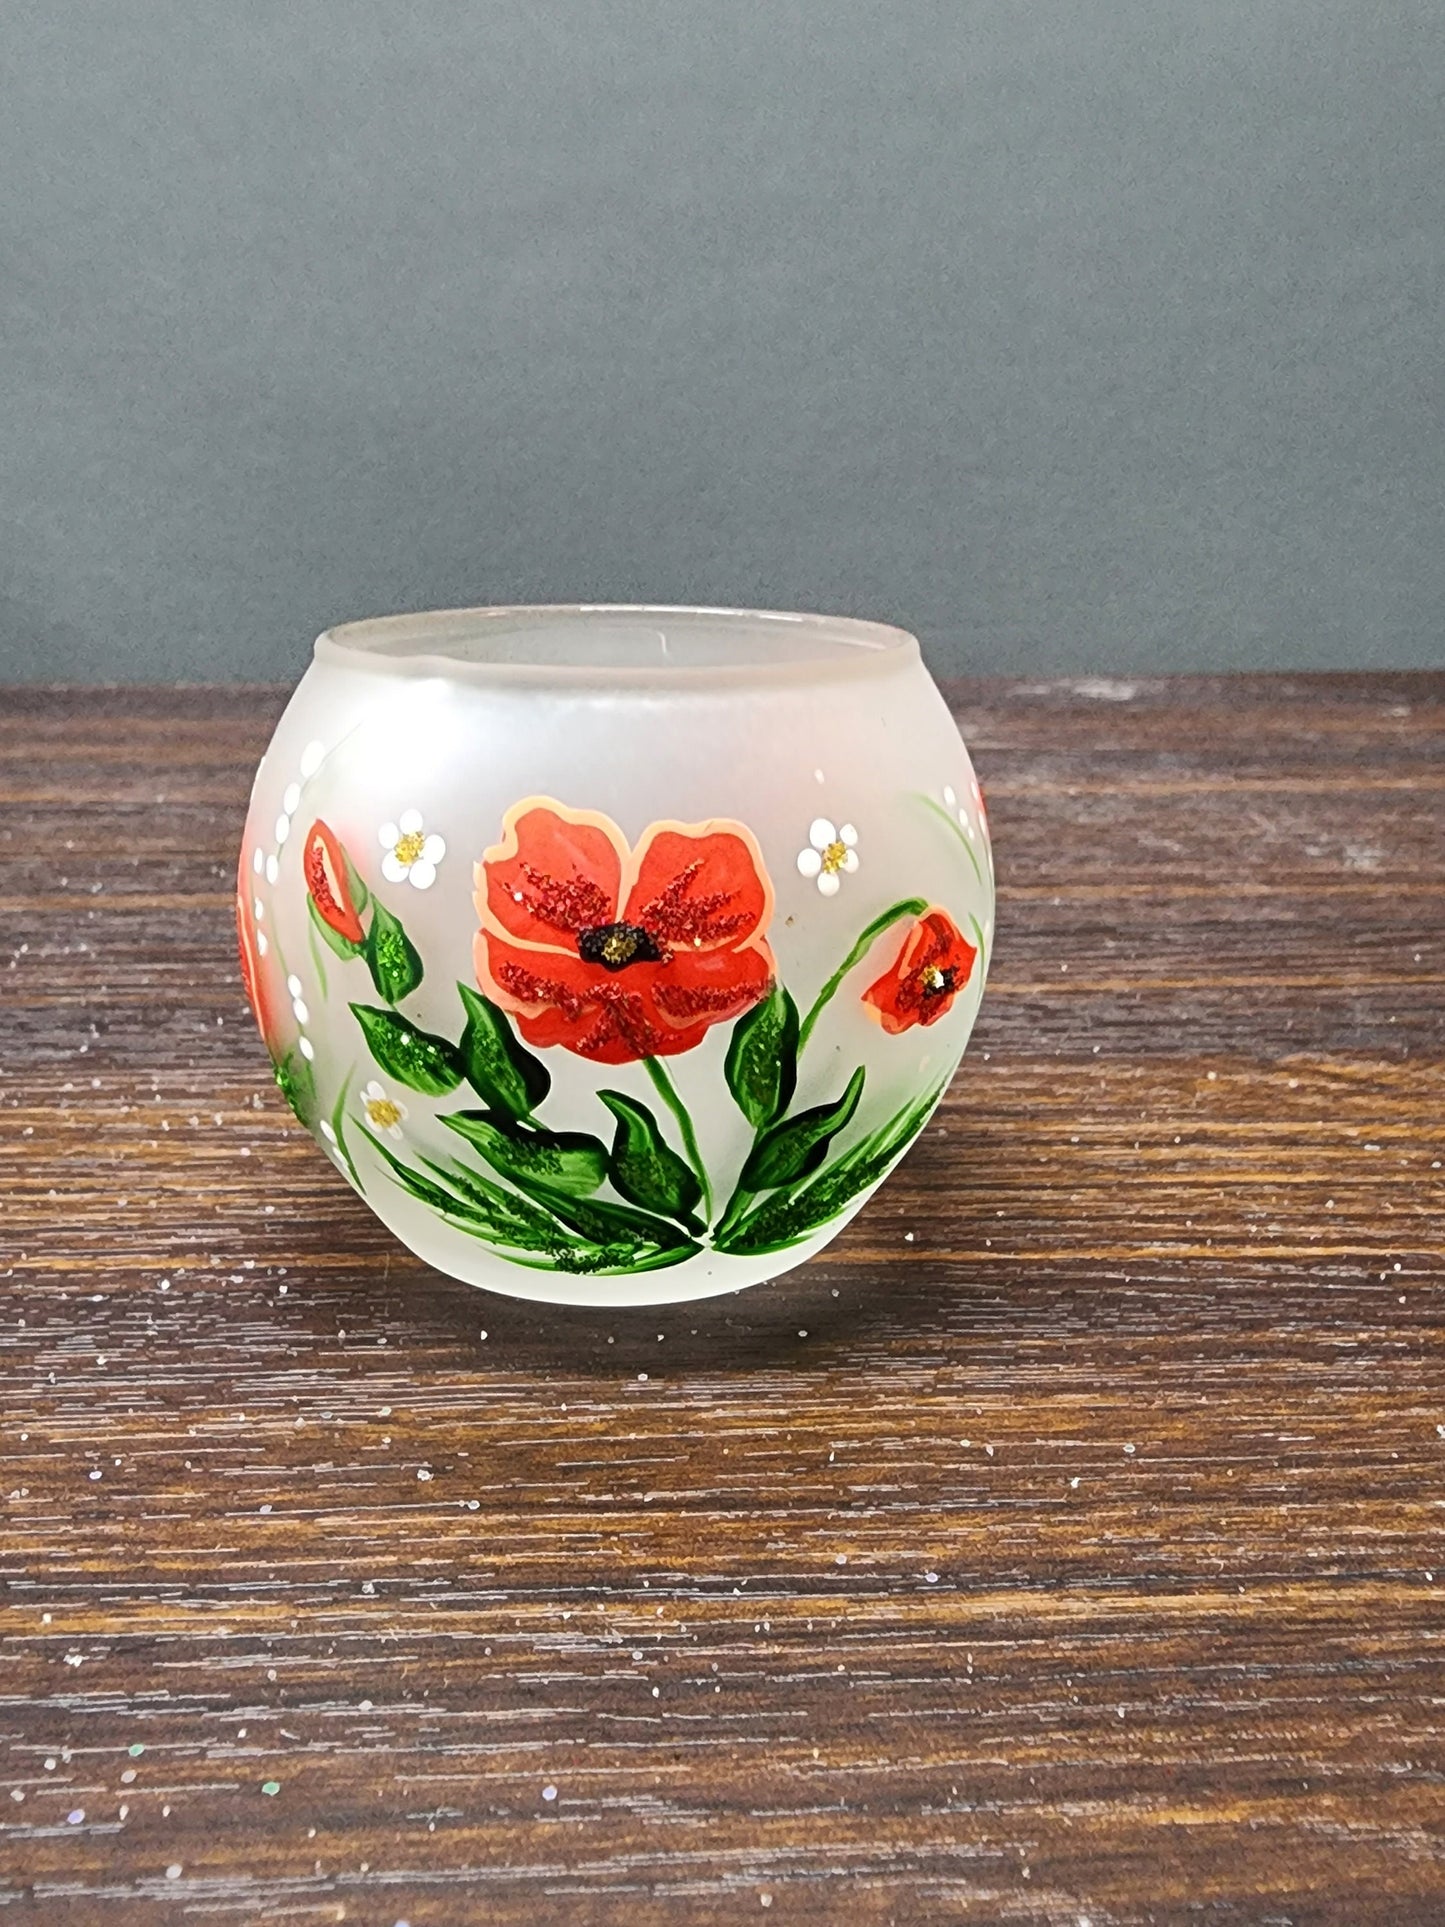 Poppy Flower Candle Holder  - Hand Made In Ukraine - Blown Glass - Hand Painted - Frosted Glass - Poppy Flower - Tealight Candle Holder